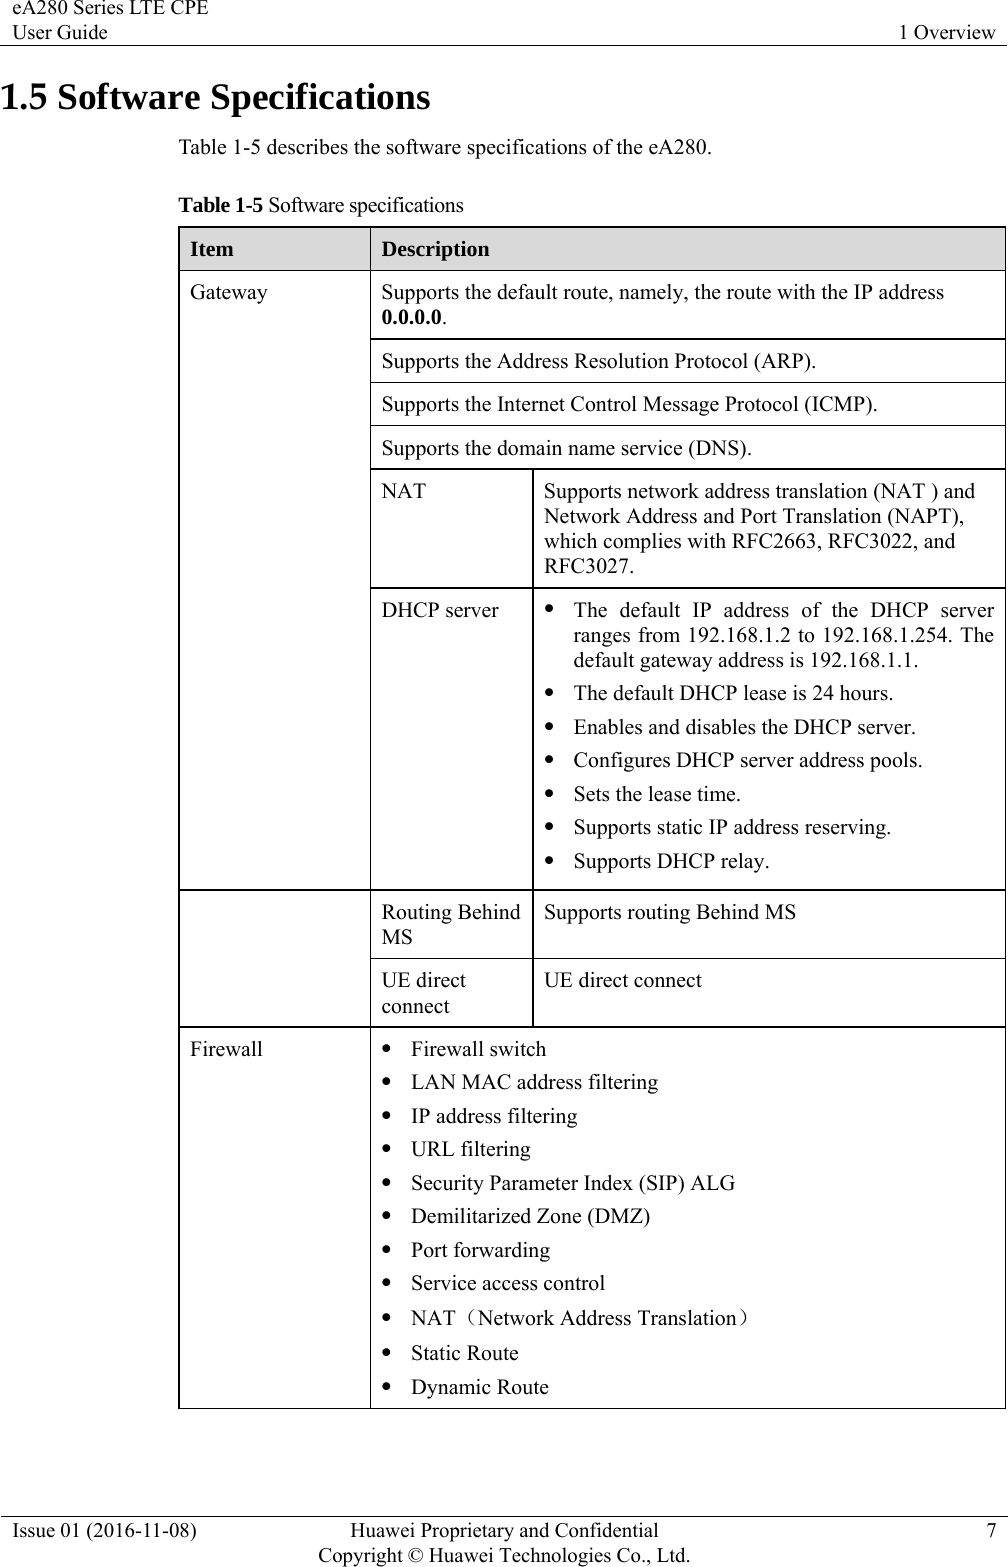 eA280 Series LTE CPE User Guide  1 Overview Issue 01 (2016-11-08)  Huawei Proprietary and Confidential         Copyright © Huawei Technologies Co., Ltd.7 1.5 Software Specifications Table 1-5 describes the software specifications of the eA280. Table 1-5 Software specifications Item  Description Gateway  Supports the default route, namely, the route with the IP address 0.0.0.0. Supports the Address Resolution Protocol (ARP). Supports the Internet Control Message Protocol (ICMP). Supports the domain name service (DNS). NAT  Supports network address translation (NAT ) and Network Address and Port Translation (NAPT), which complies with RFC2663, RFC3022, and RFC3027. DHCP server   The default IP address of the DHCP server ranges from 192.168.1.2 to 192.168.1.254. The default gateway address is 192.168.1.1.  The default DHCP lease is 24 hours.  Enables and disables the DHCP server.  Configures DHCP server address pools.  Sets the lease time.  Supports static IP address reserving.  Supports DHCP relay.  Routing Behind MS Supports routing Behind MS UE direct connect UE direct connect Firewall   Firewall switch  LAN MAC address filtering  IP address filtering  URL filtering  Security Parameter Index (SIP) ALG  Demilitarized Zone (DMZ)  Port forwarding  Service access control  NAT（Network Address Translation）  Static Route  Dynamic Route 